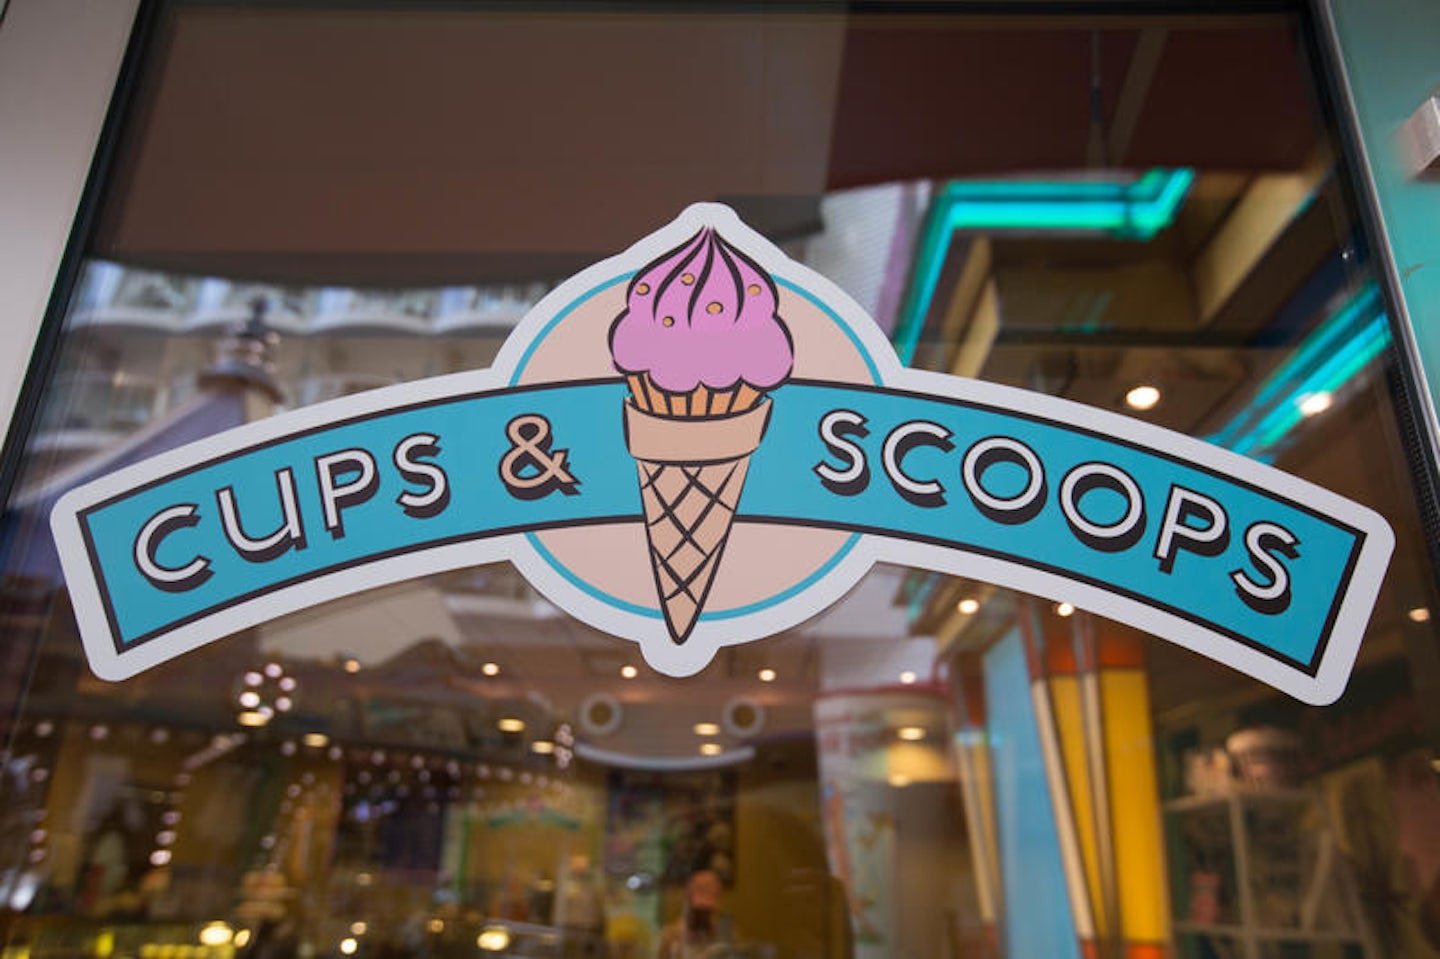 Cups & Scoops on Allure of the Seas